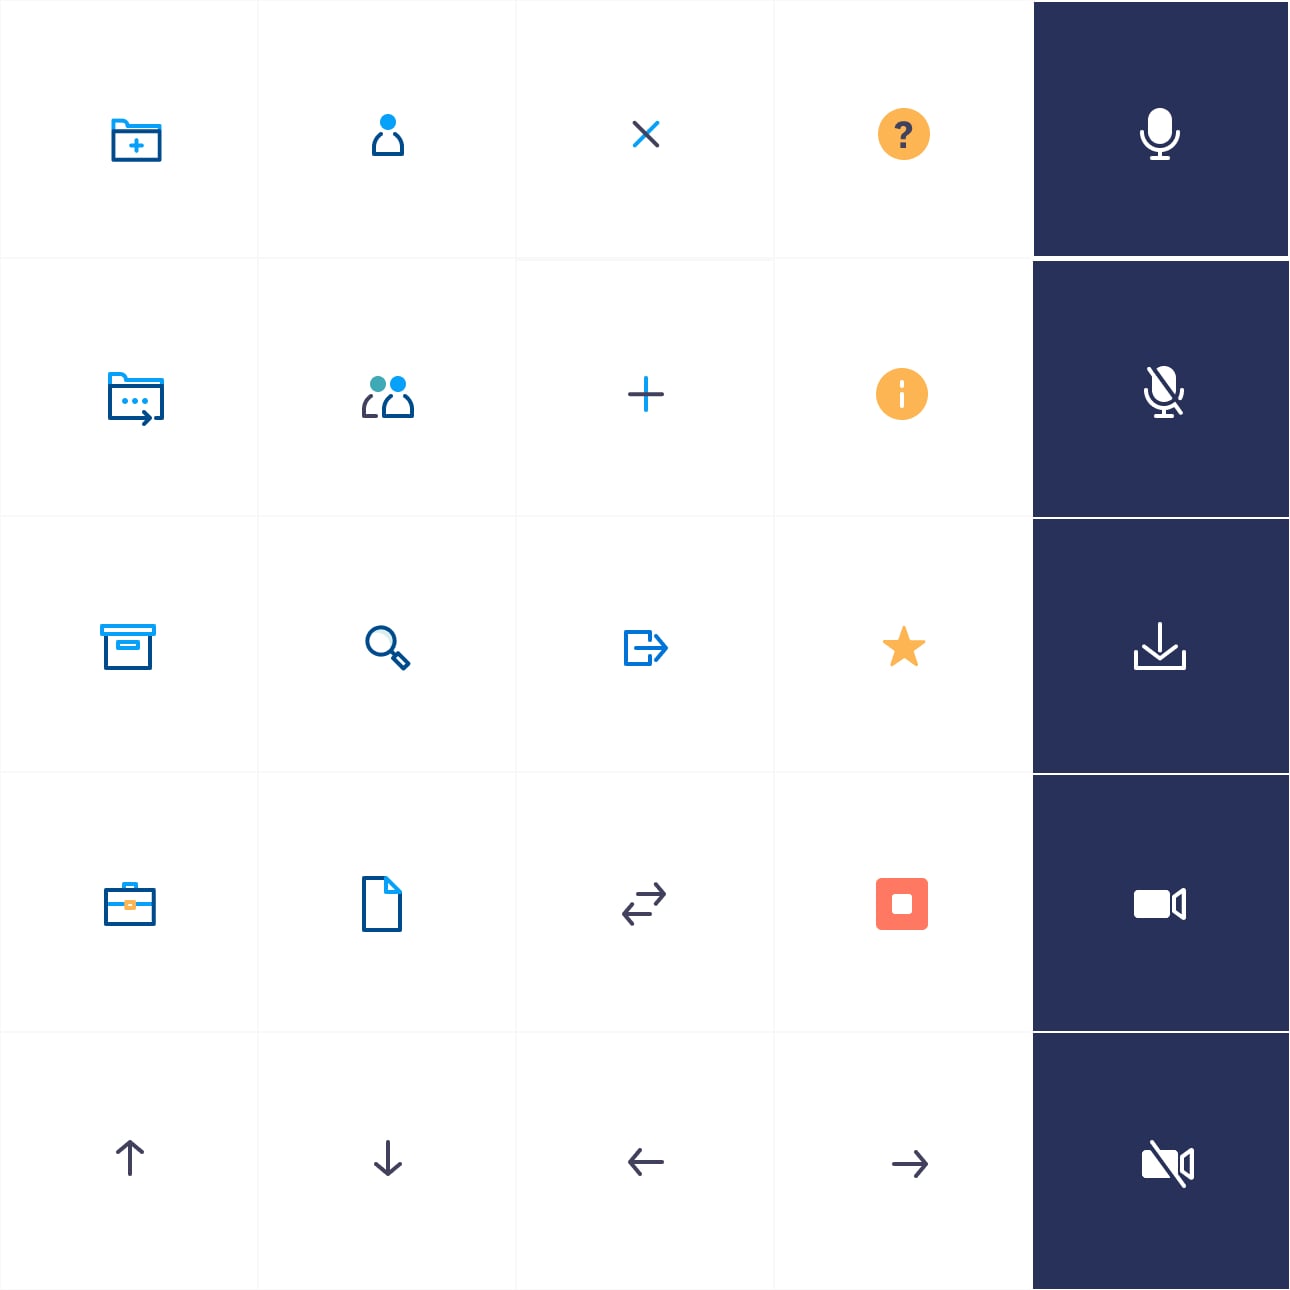 Grid with custom icons made for Rätt